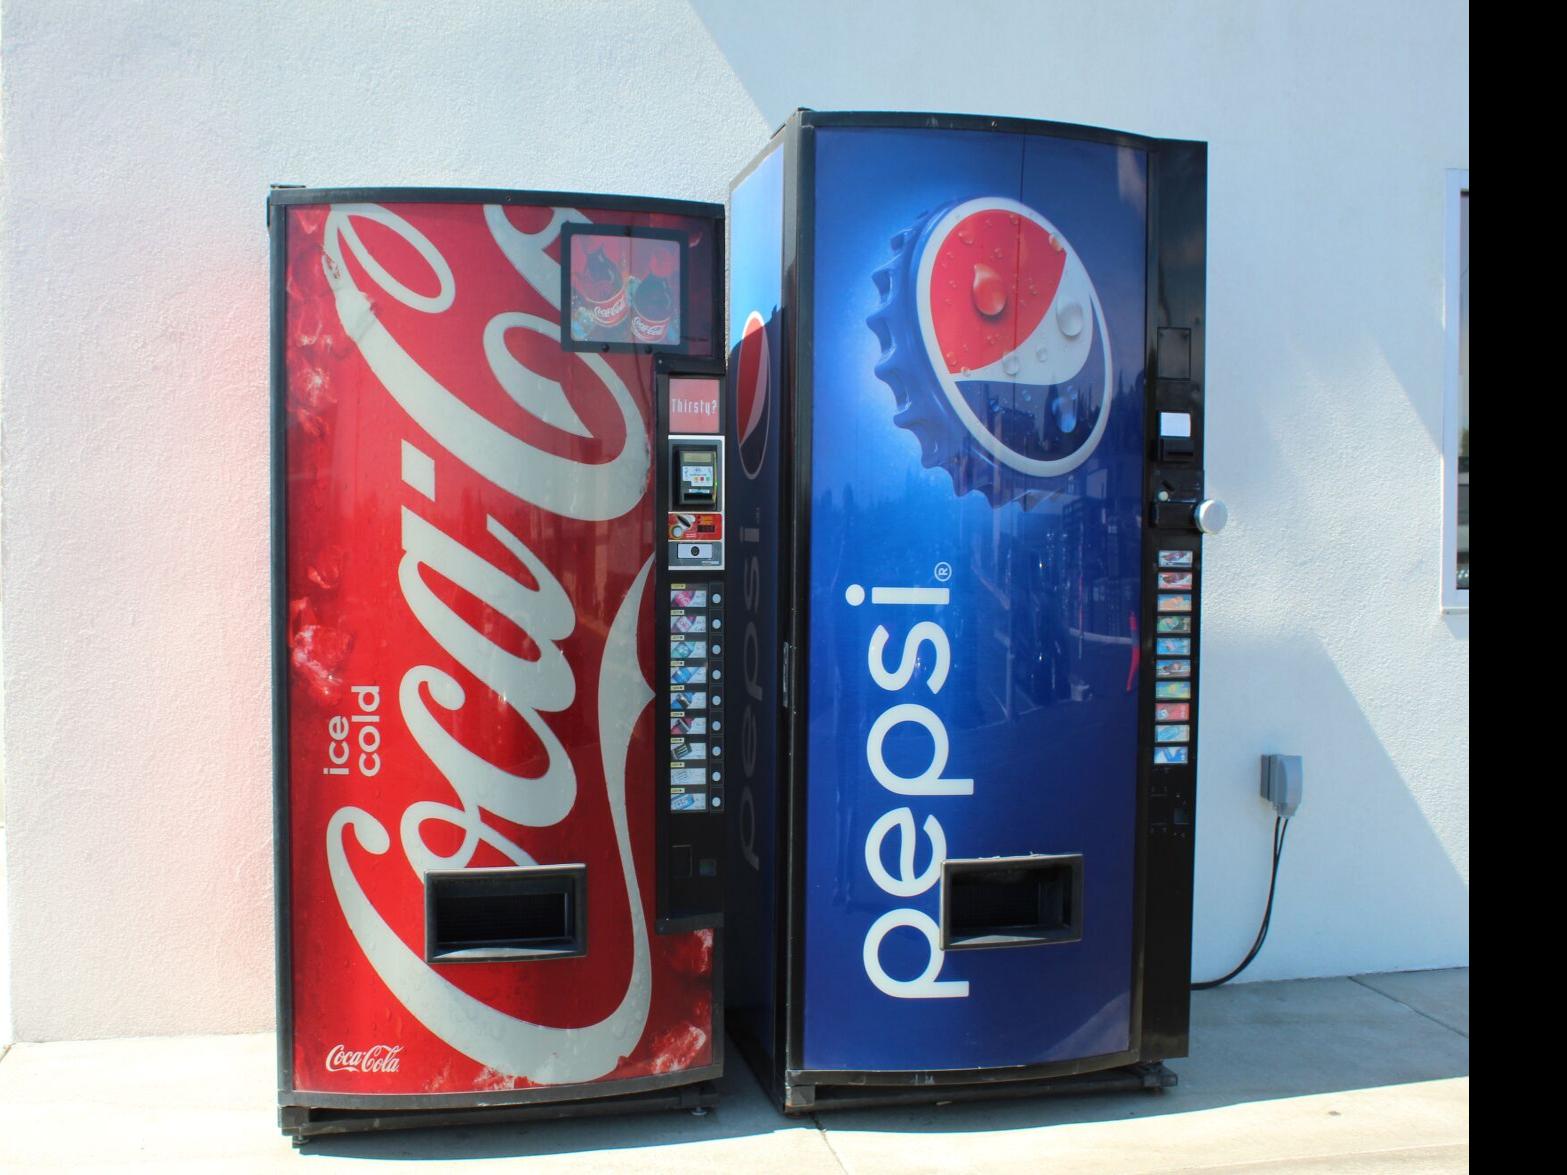 Pepsi or Coke? There's room for both in the Yakima Valley